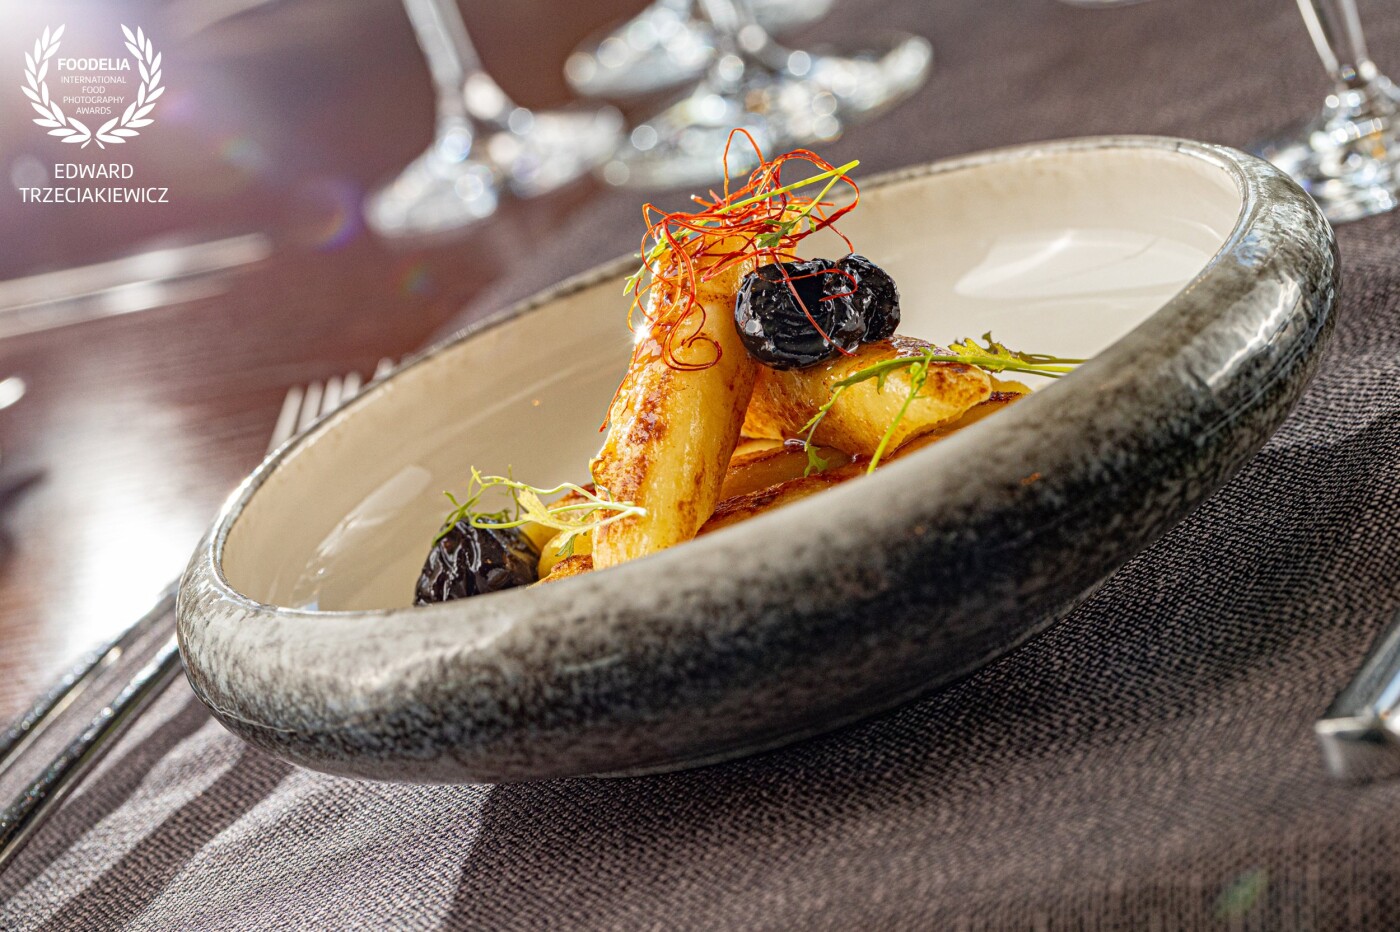 Dumplings with cottage cheese, Hungarian plum, chilli threads, flamed on tincture of pine shoots.<br />
Chef:<br />
Michał Soliwoda<br />
Hotel Mikołajki - Mikołajki - Poland